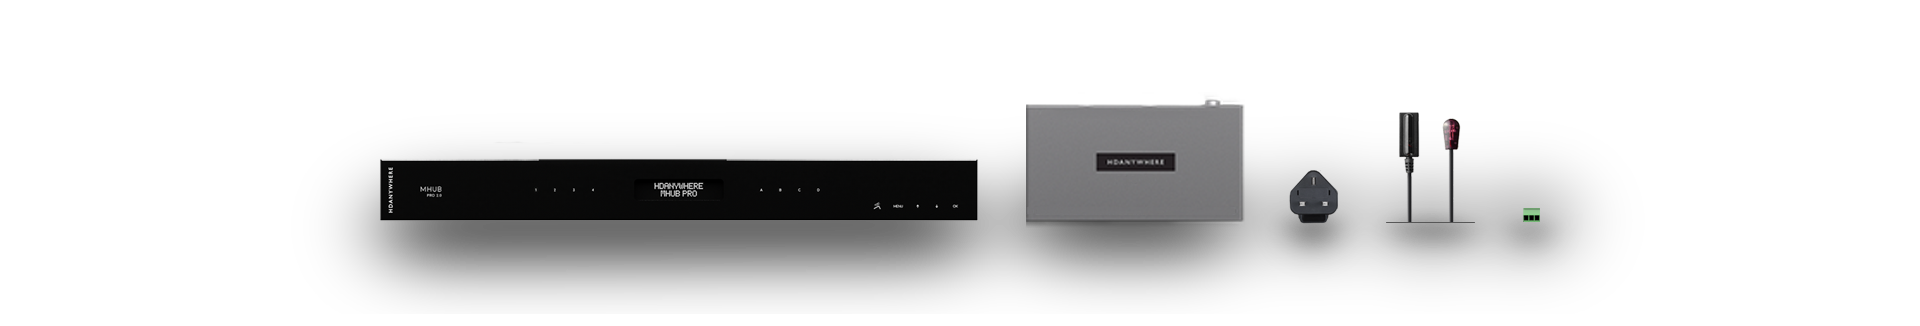 HDANYWHERE MHUB Pro - included